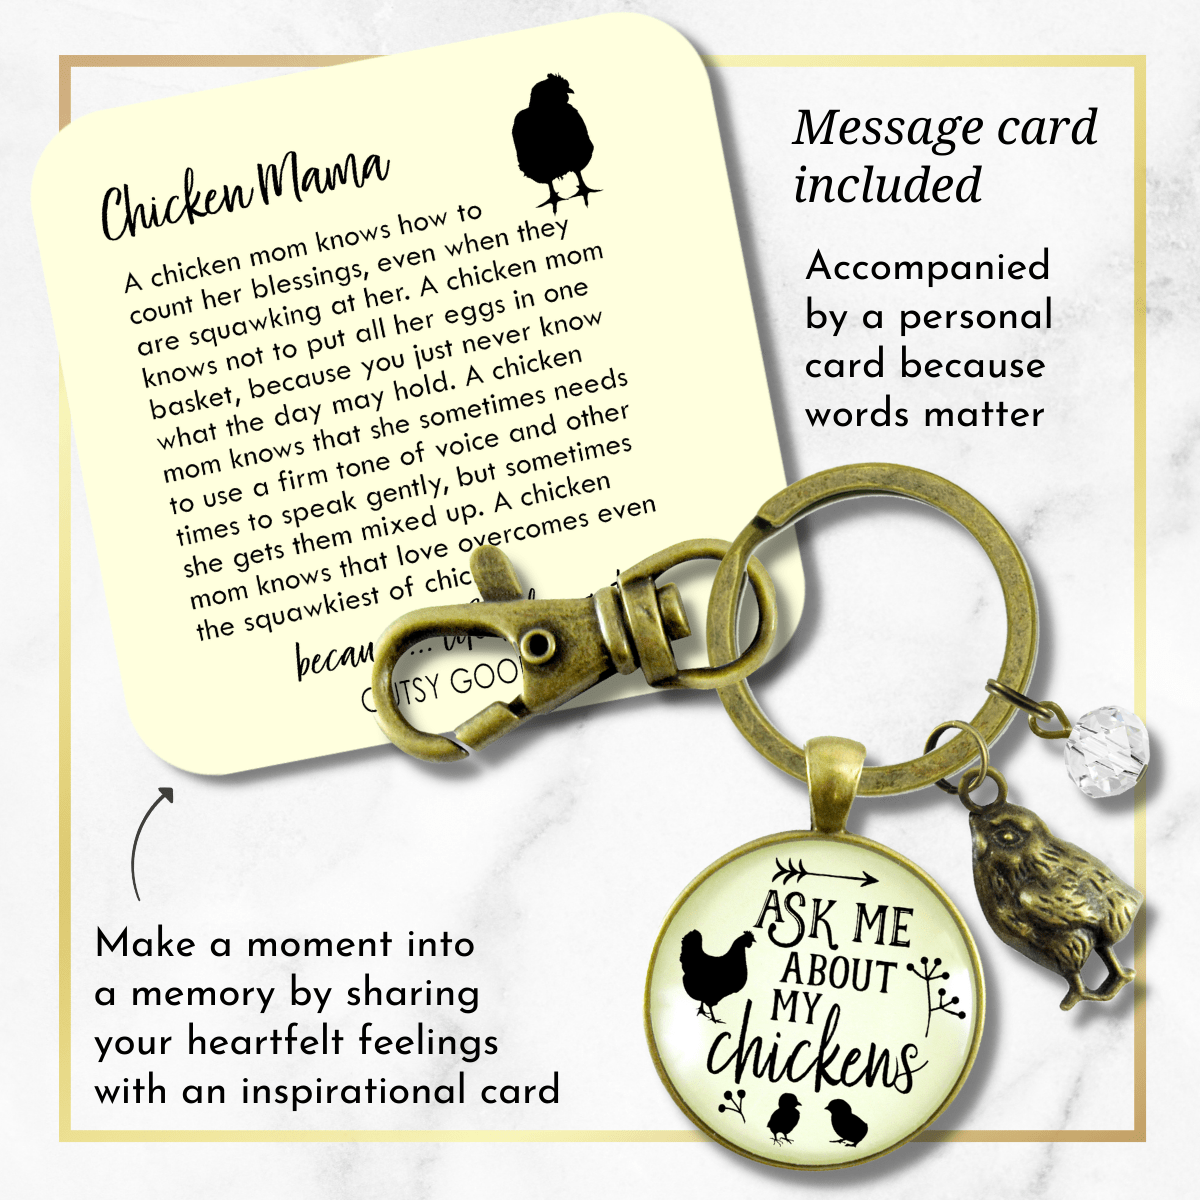 Chicken Mom Keychain Ask Me About My Chickens Novelty Gift Farm Life Inspired - Gutsy Goodness Handmade Jewelry;Chicken Mom Keychain Ask Me About My Chickens Novelty Gift Farm Life Inspired - Gutsy Goodness Handmade Jewelry Gifts